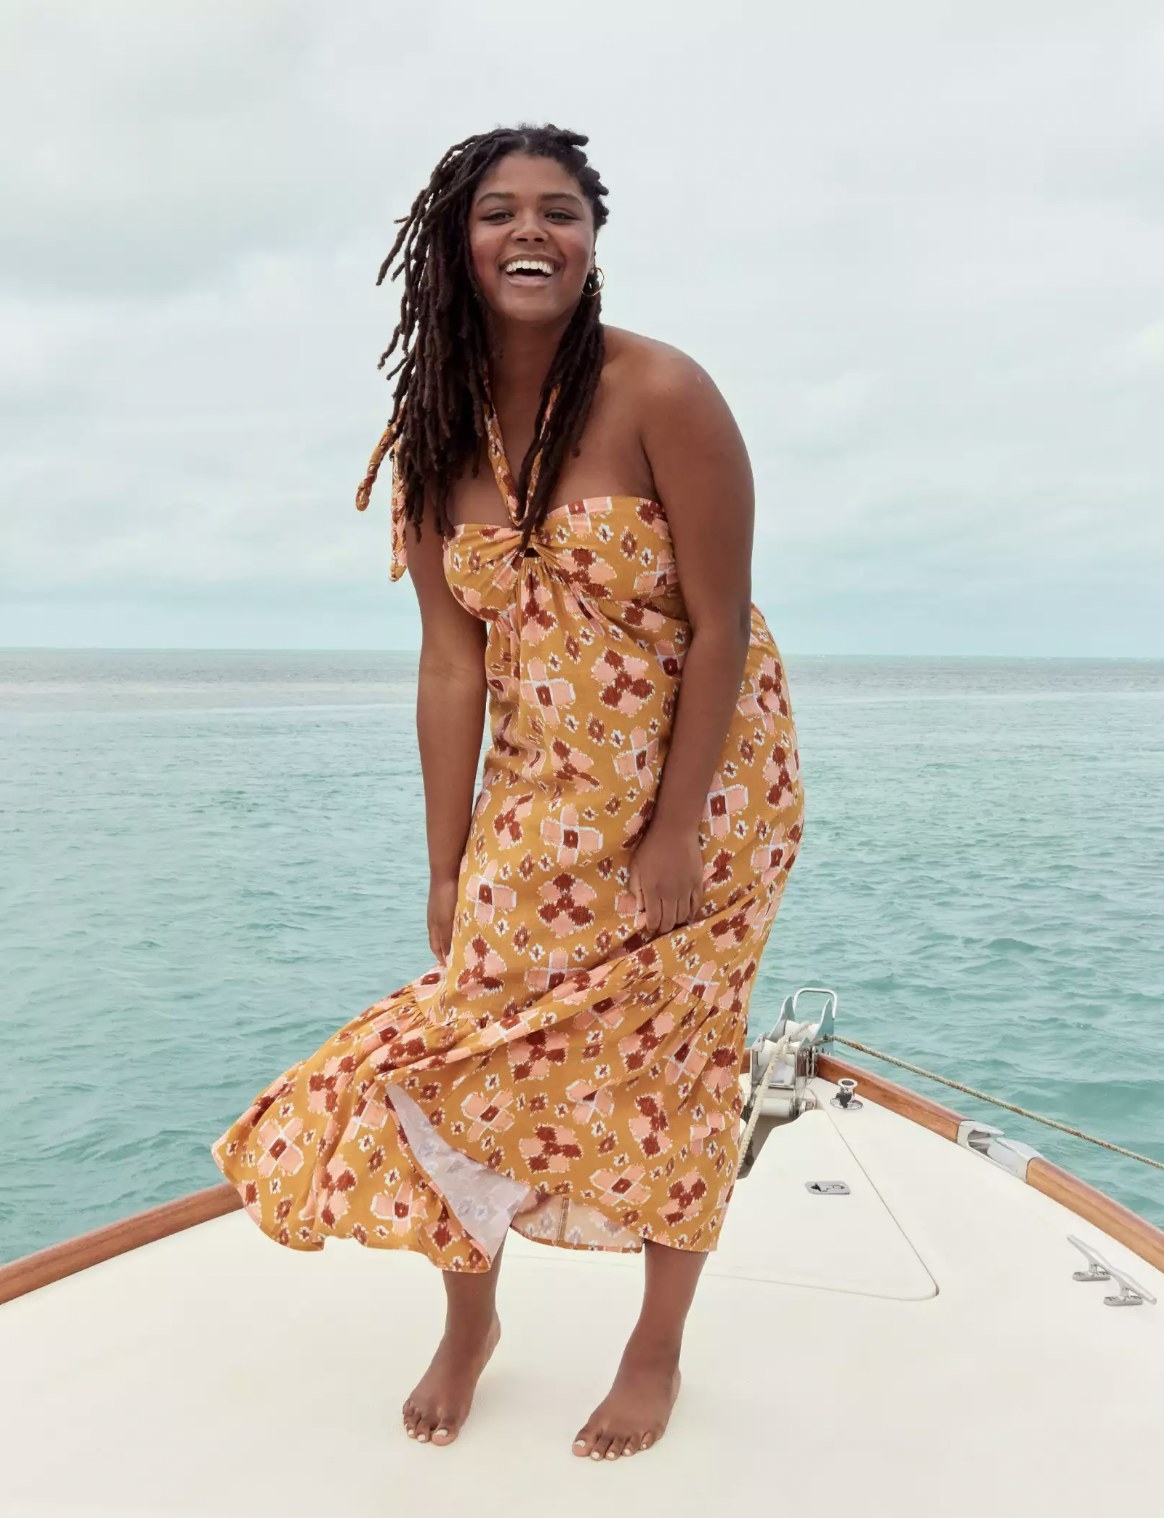 Model standing on bow of boat in the printed dress